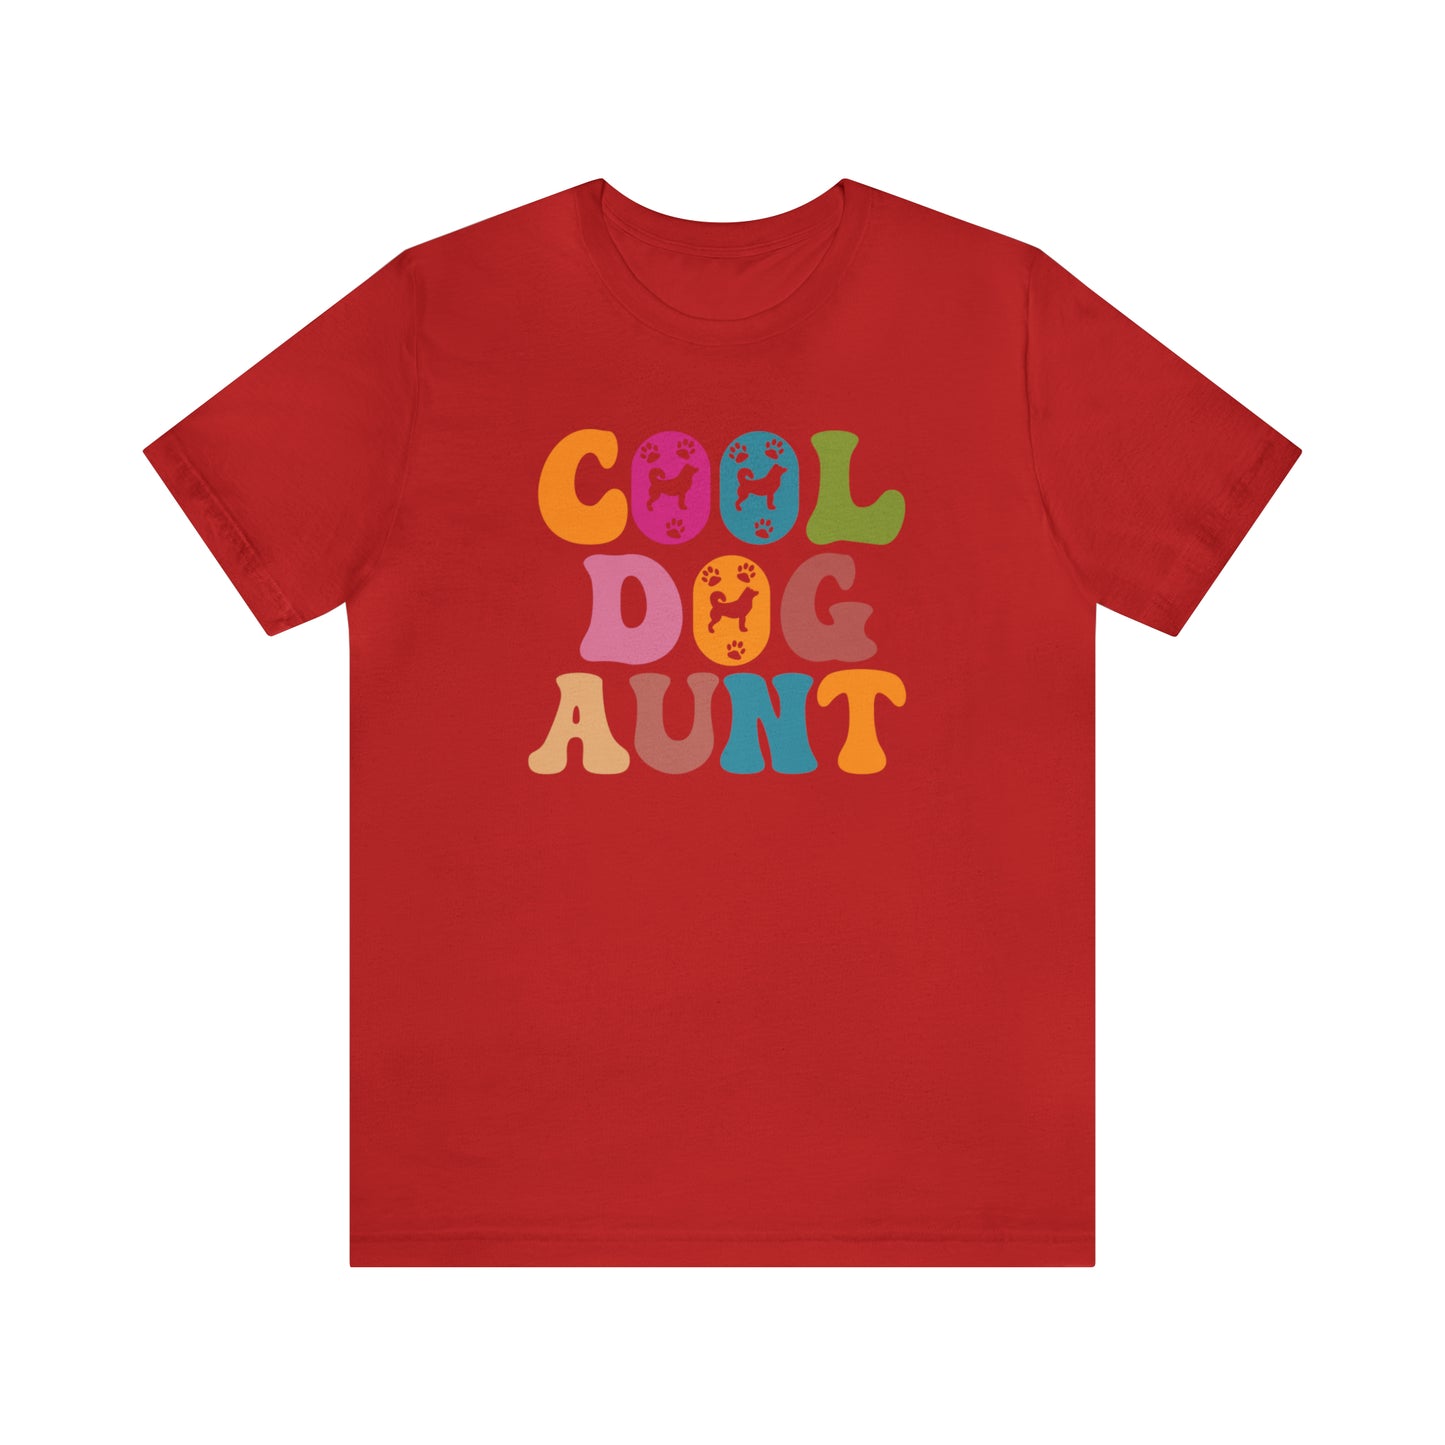 Cool Dog Aunt Shirt for Women, Dog Aunt Gift for Animal Lover, Dog Auntie Tee for Aunt, Funny Dog Lover Tee, T569